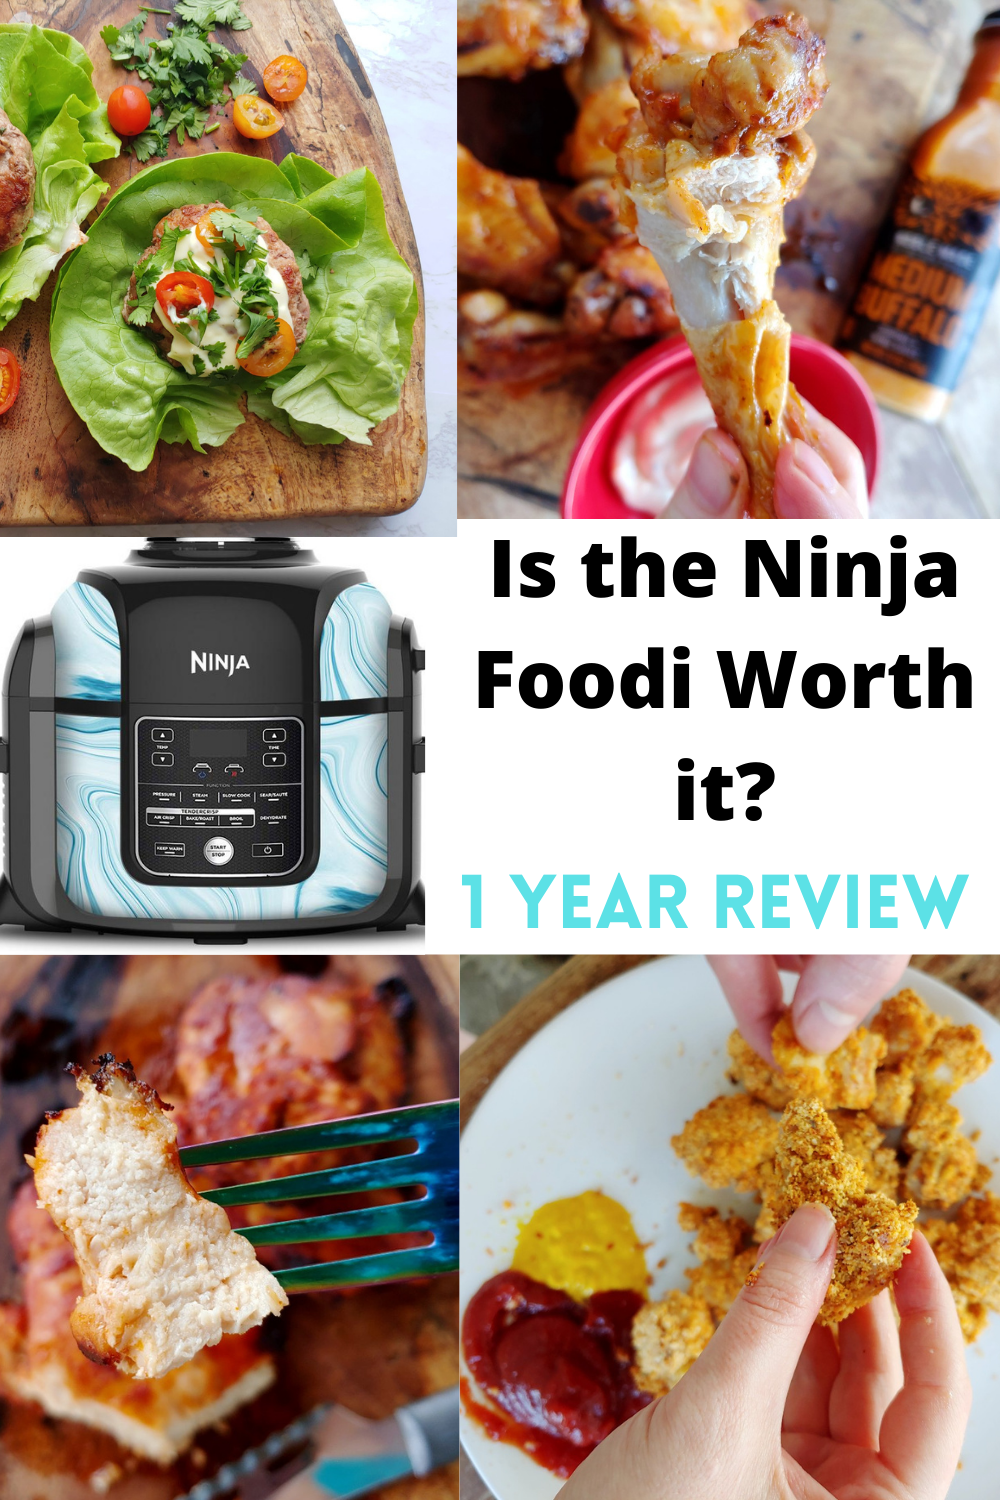 https://blissfulleating.com/wp-content/uploads/2020/12/Is-the-Ninja-Foodi-Worth-it_-1-Year-Review.png